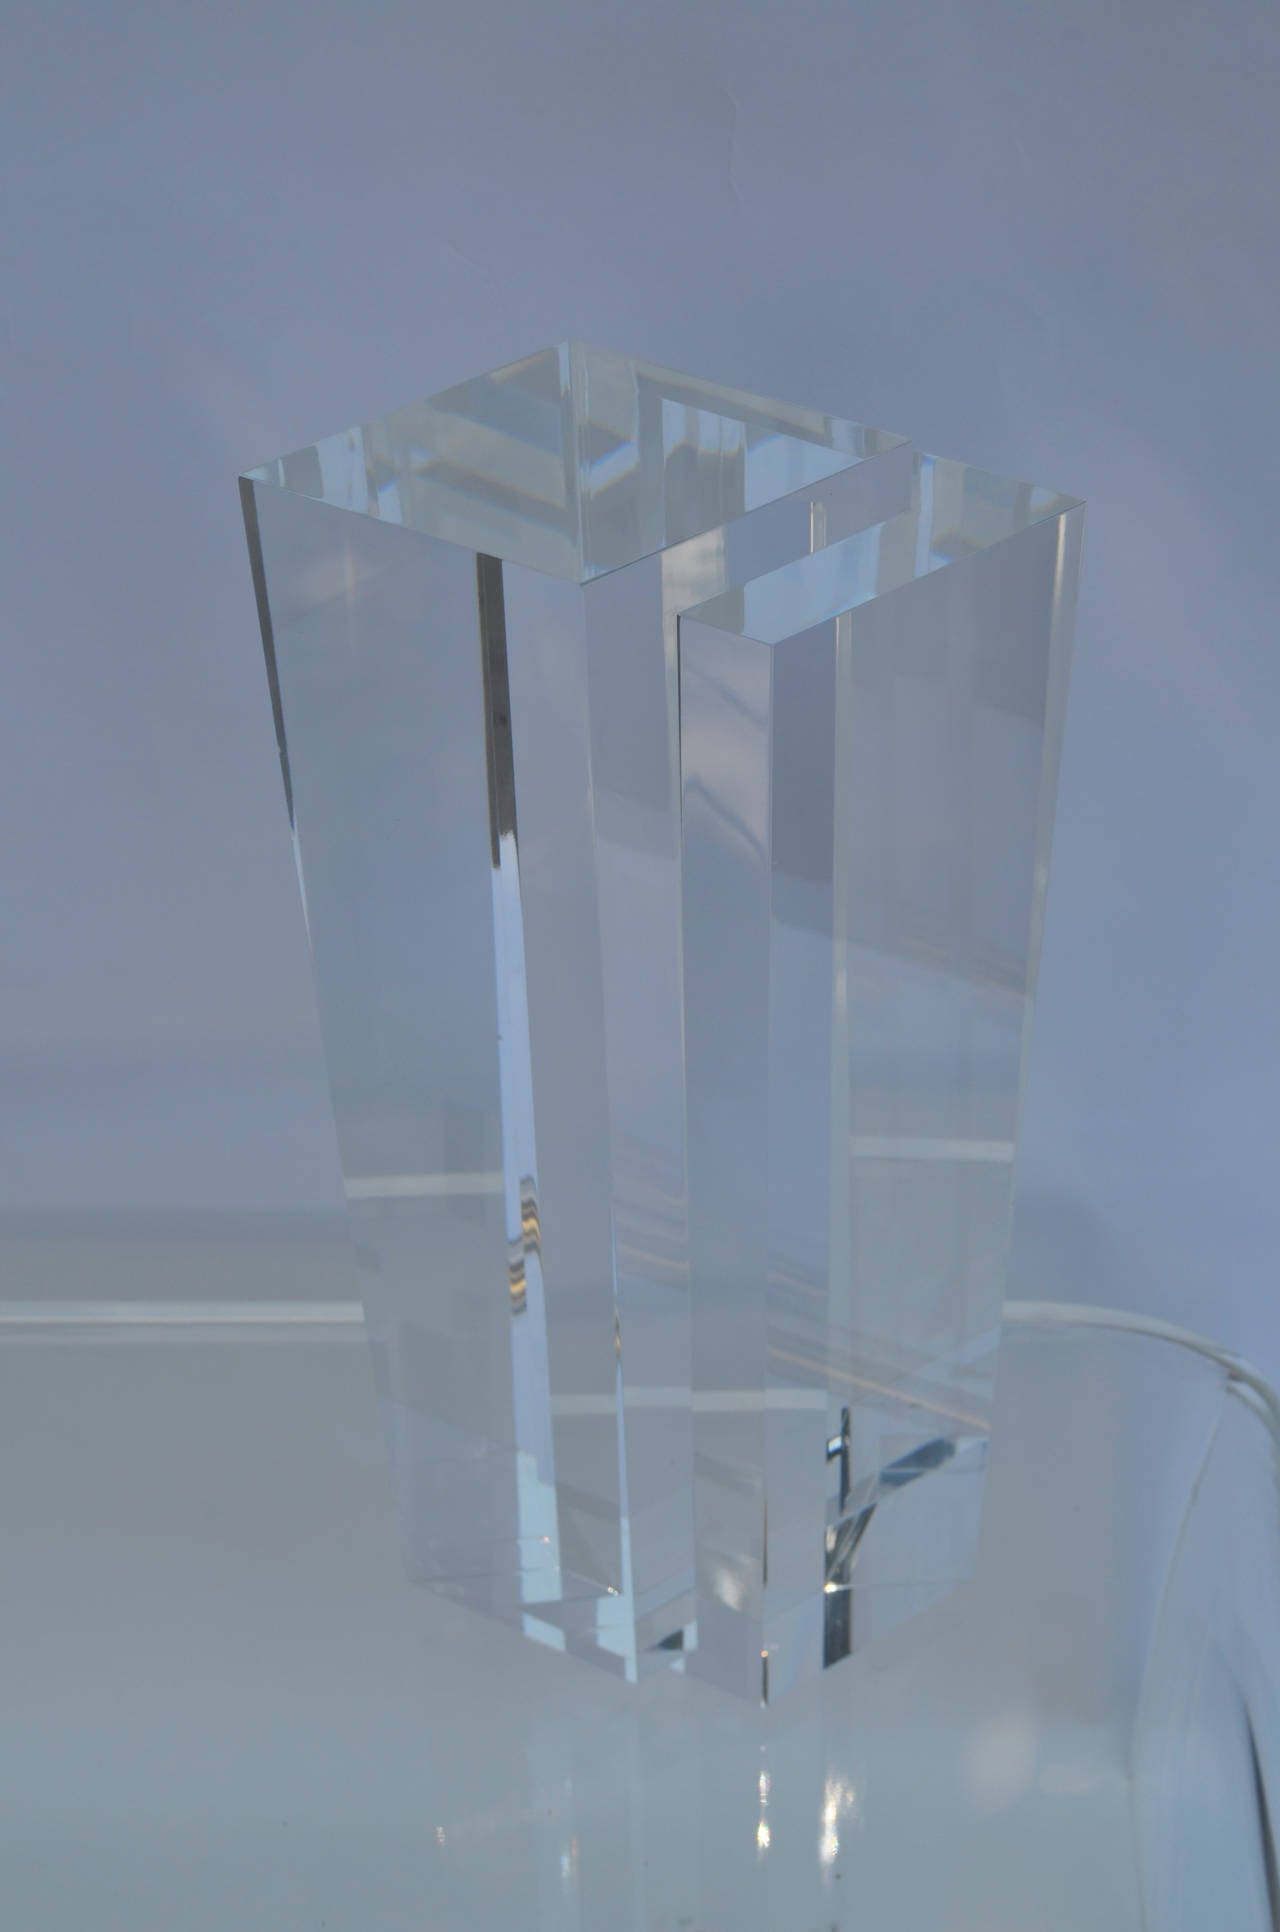 A tall Lucite skyscraper sculpture.
The acrylic is crystal clear.
Its sharp geometric lines and prismatic shape is
attractive from all angles.
Pictures do not convey the sharpness of the piece.